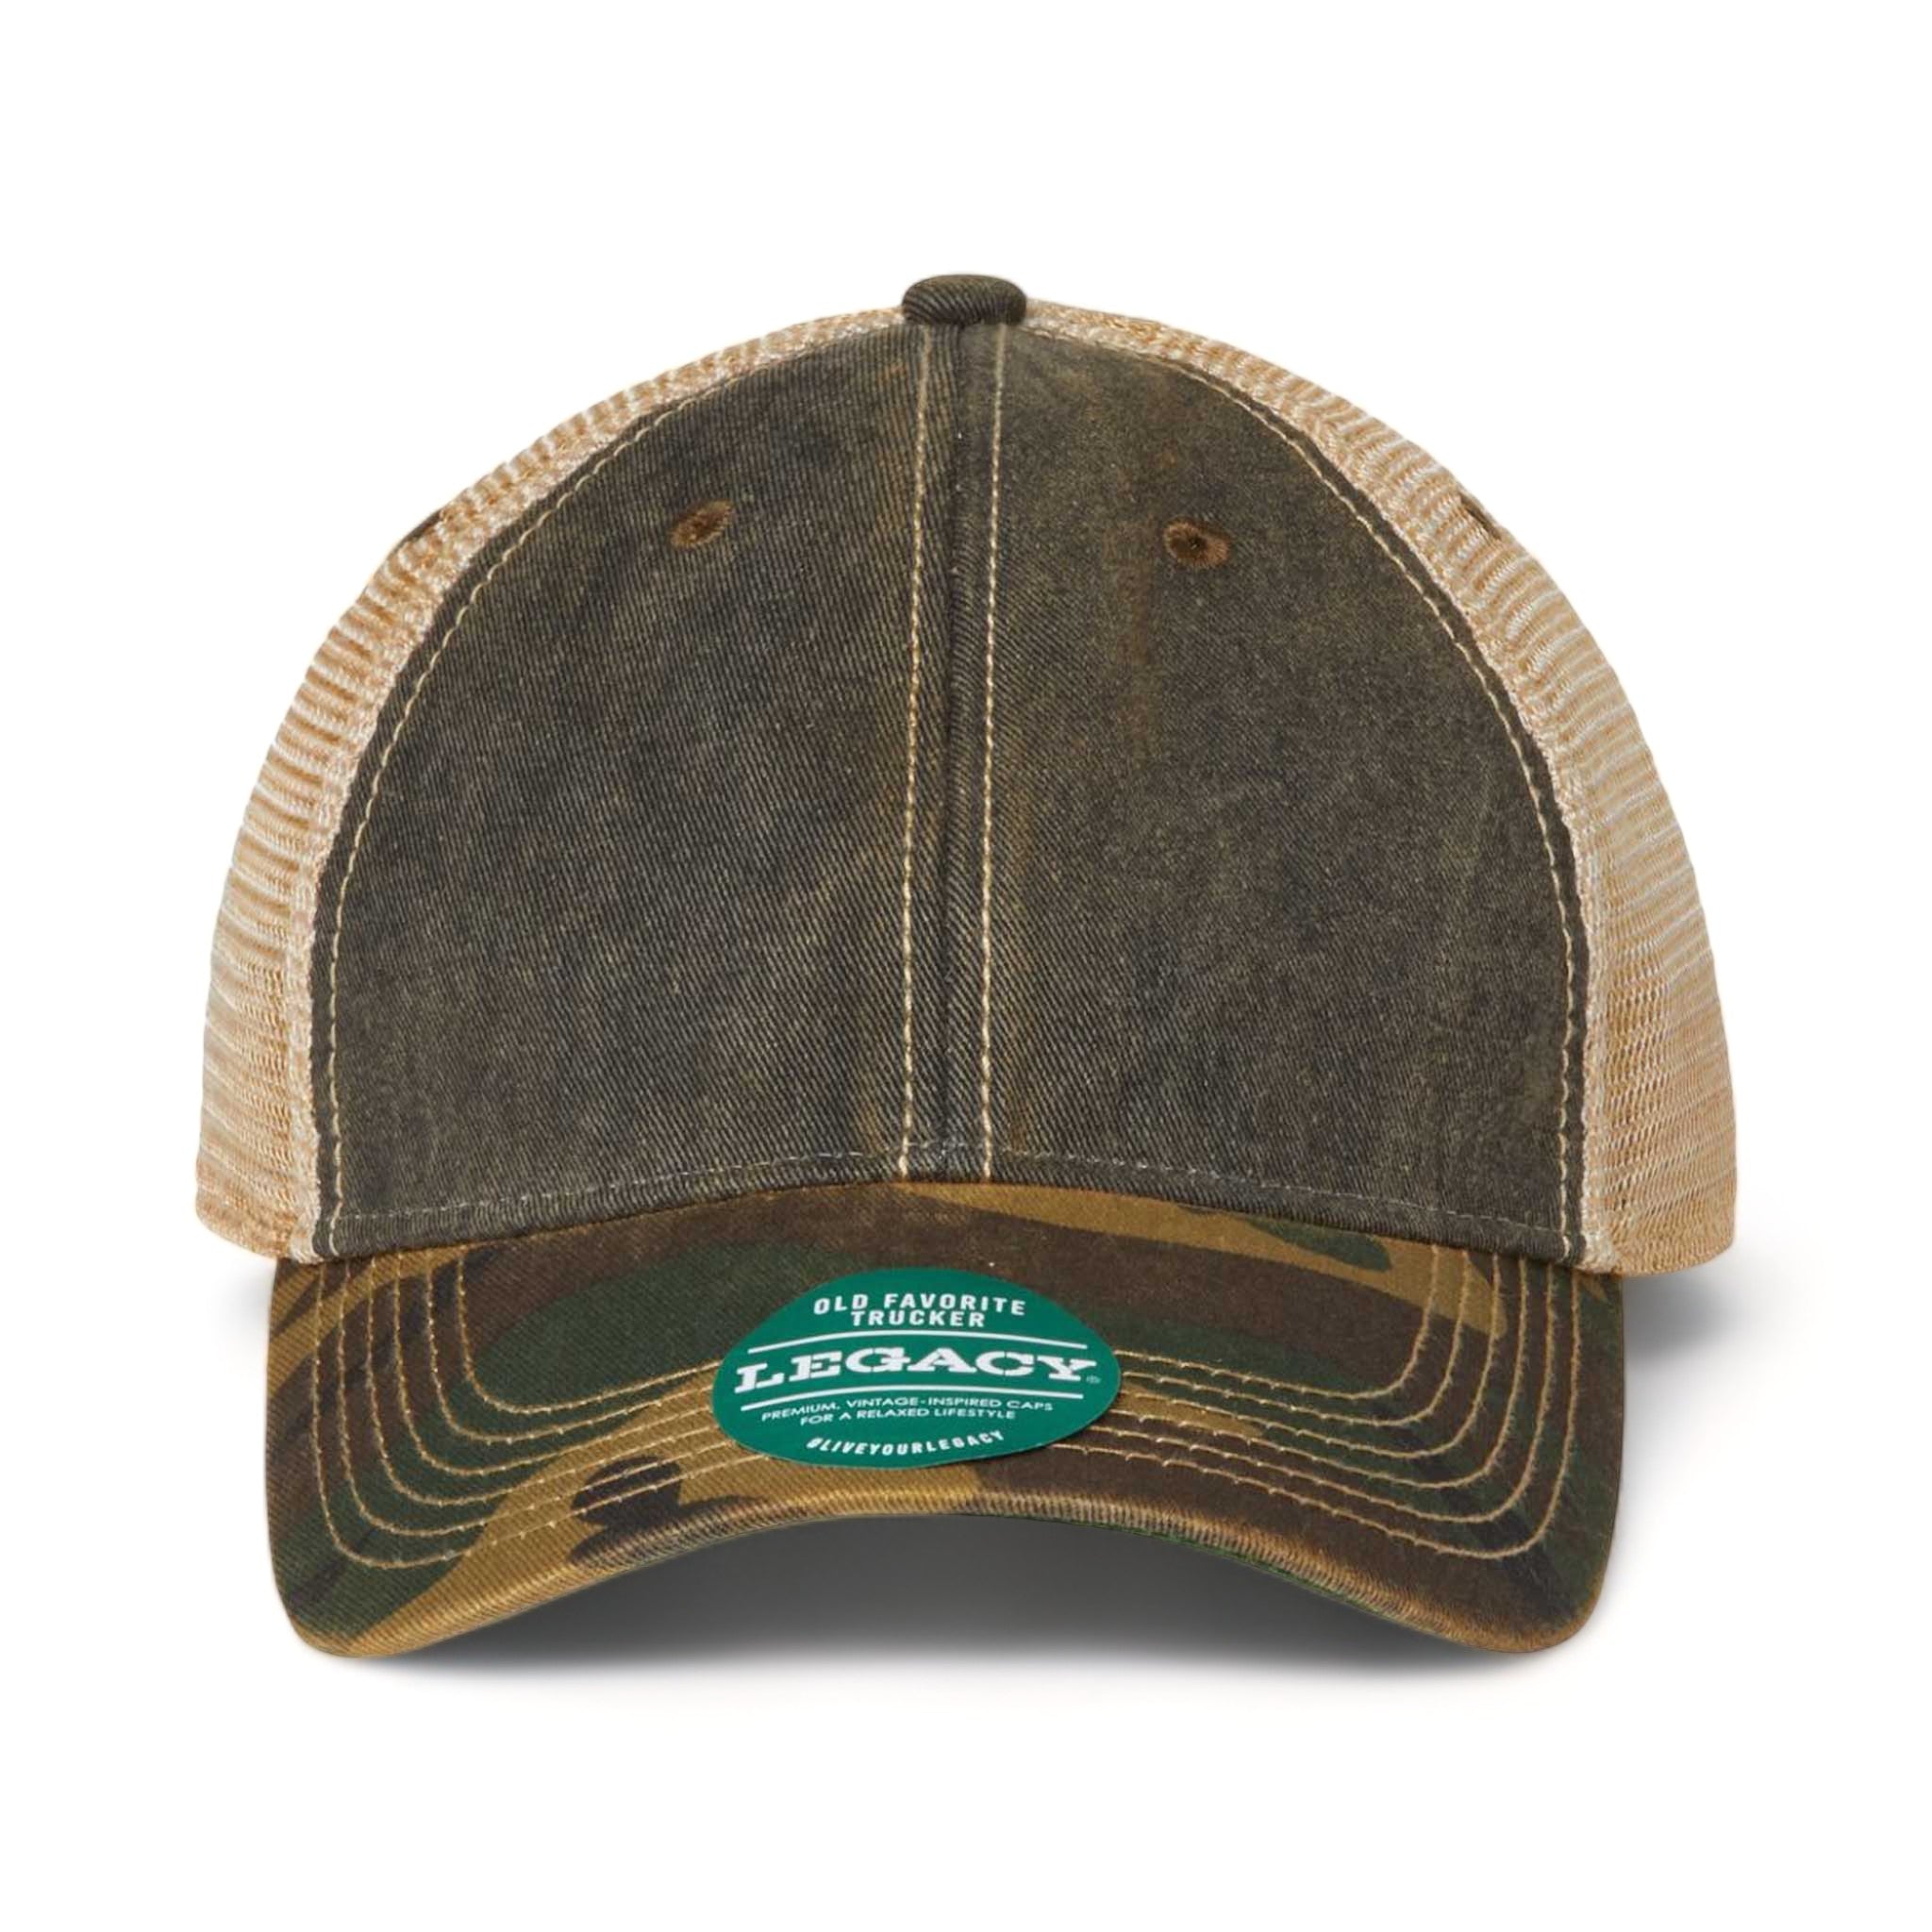 Front view of LEGACY OFA custom hat in black, army camo and khaki